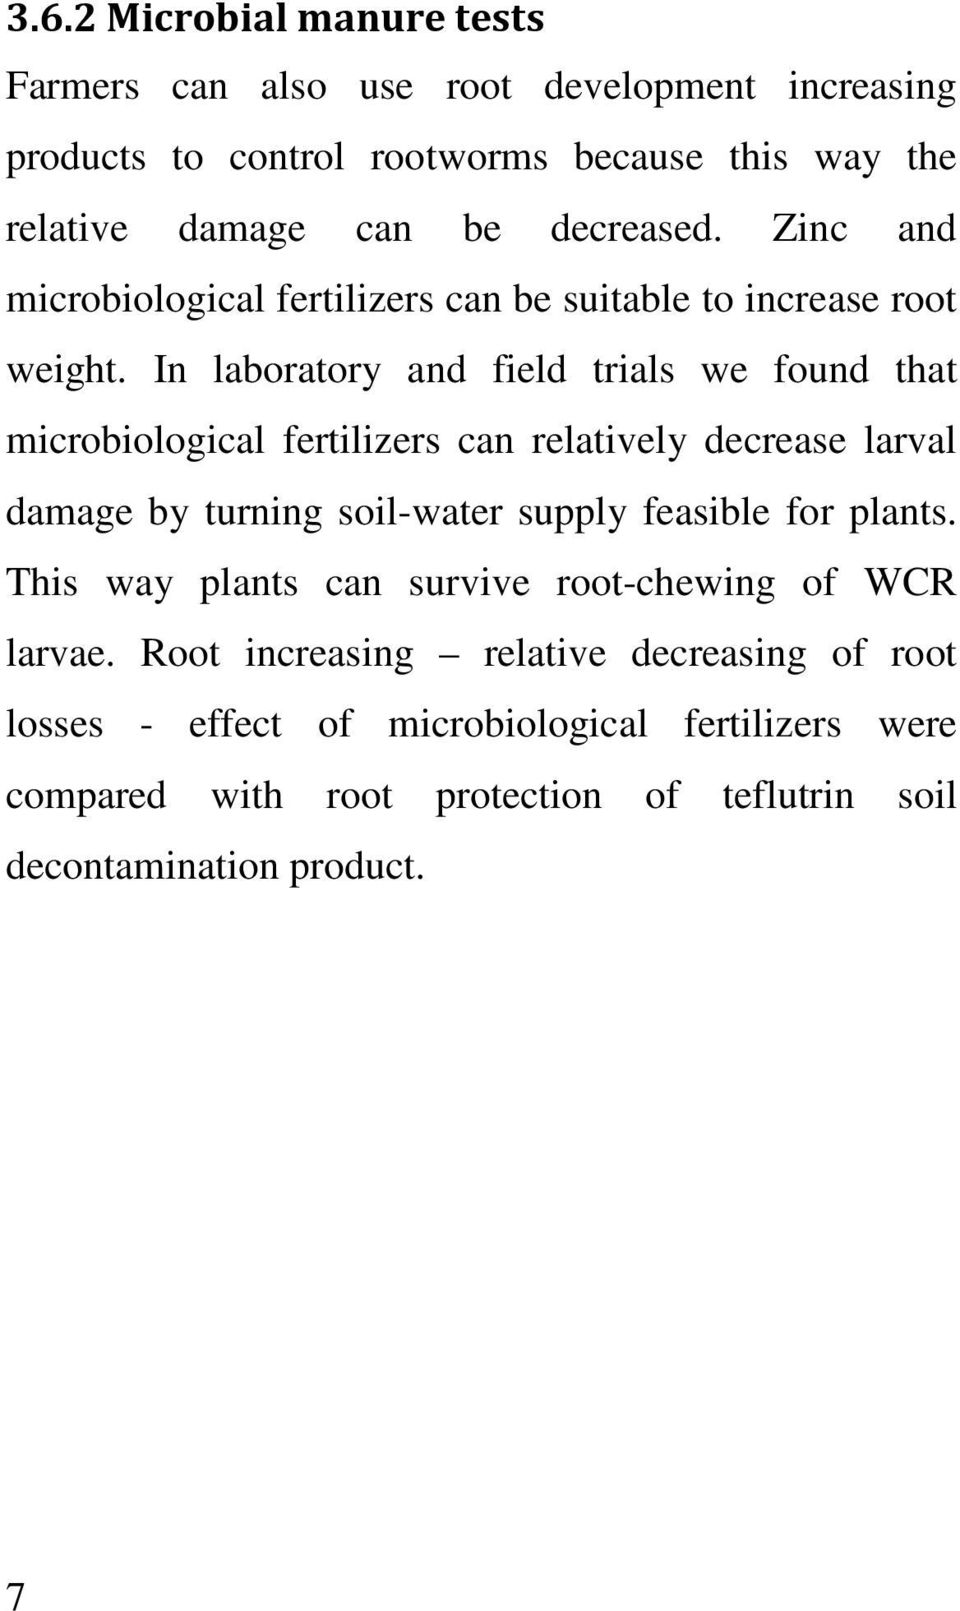 In laboratory and field trials we found that microbiological fertilizers can relatively decrease larval damage by turning soil-water supply feasible for